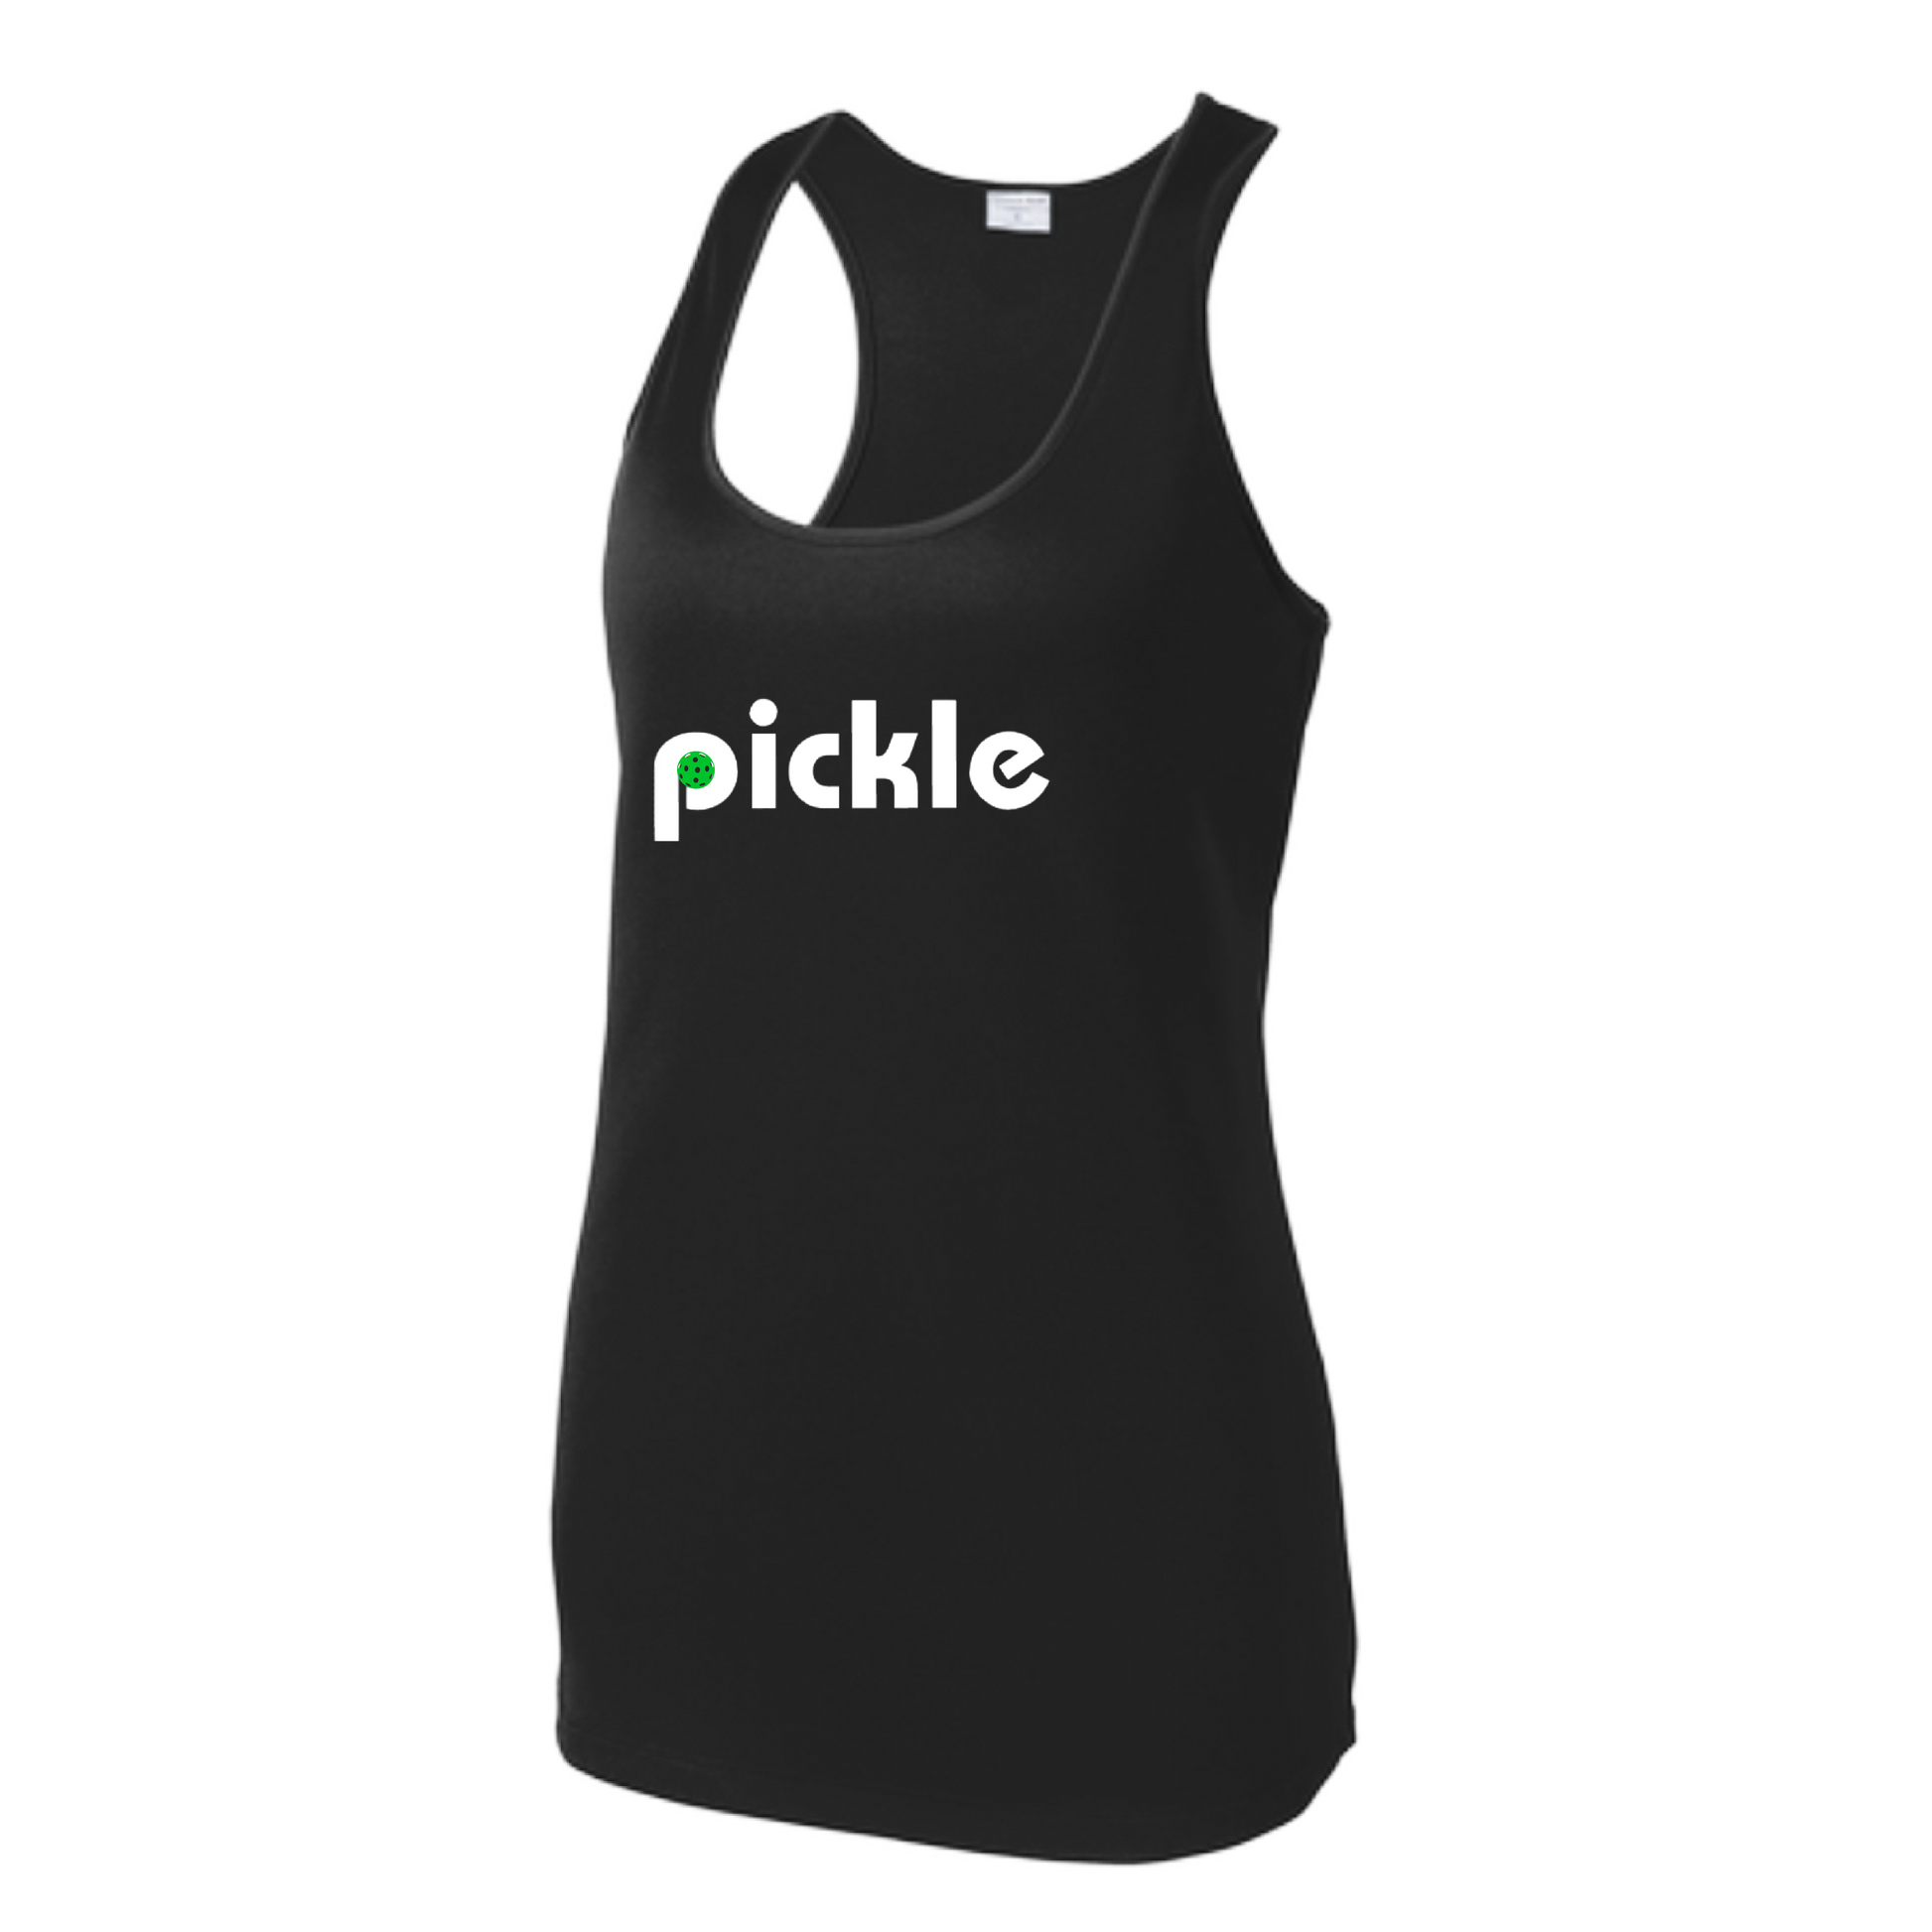 Experience the great combination of comfort and style with this Women's pickleball shirt. Crafted with a tri-blend material, it is highly breathable and lightweight, with added moisture wicking and PosiCharge technology for locked-in color.